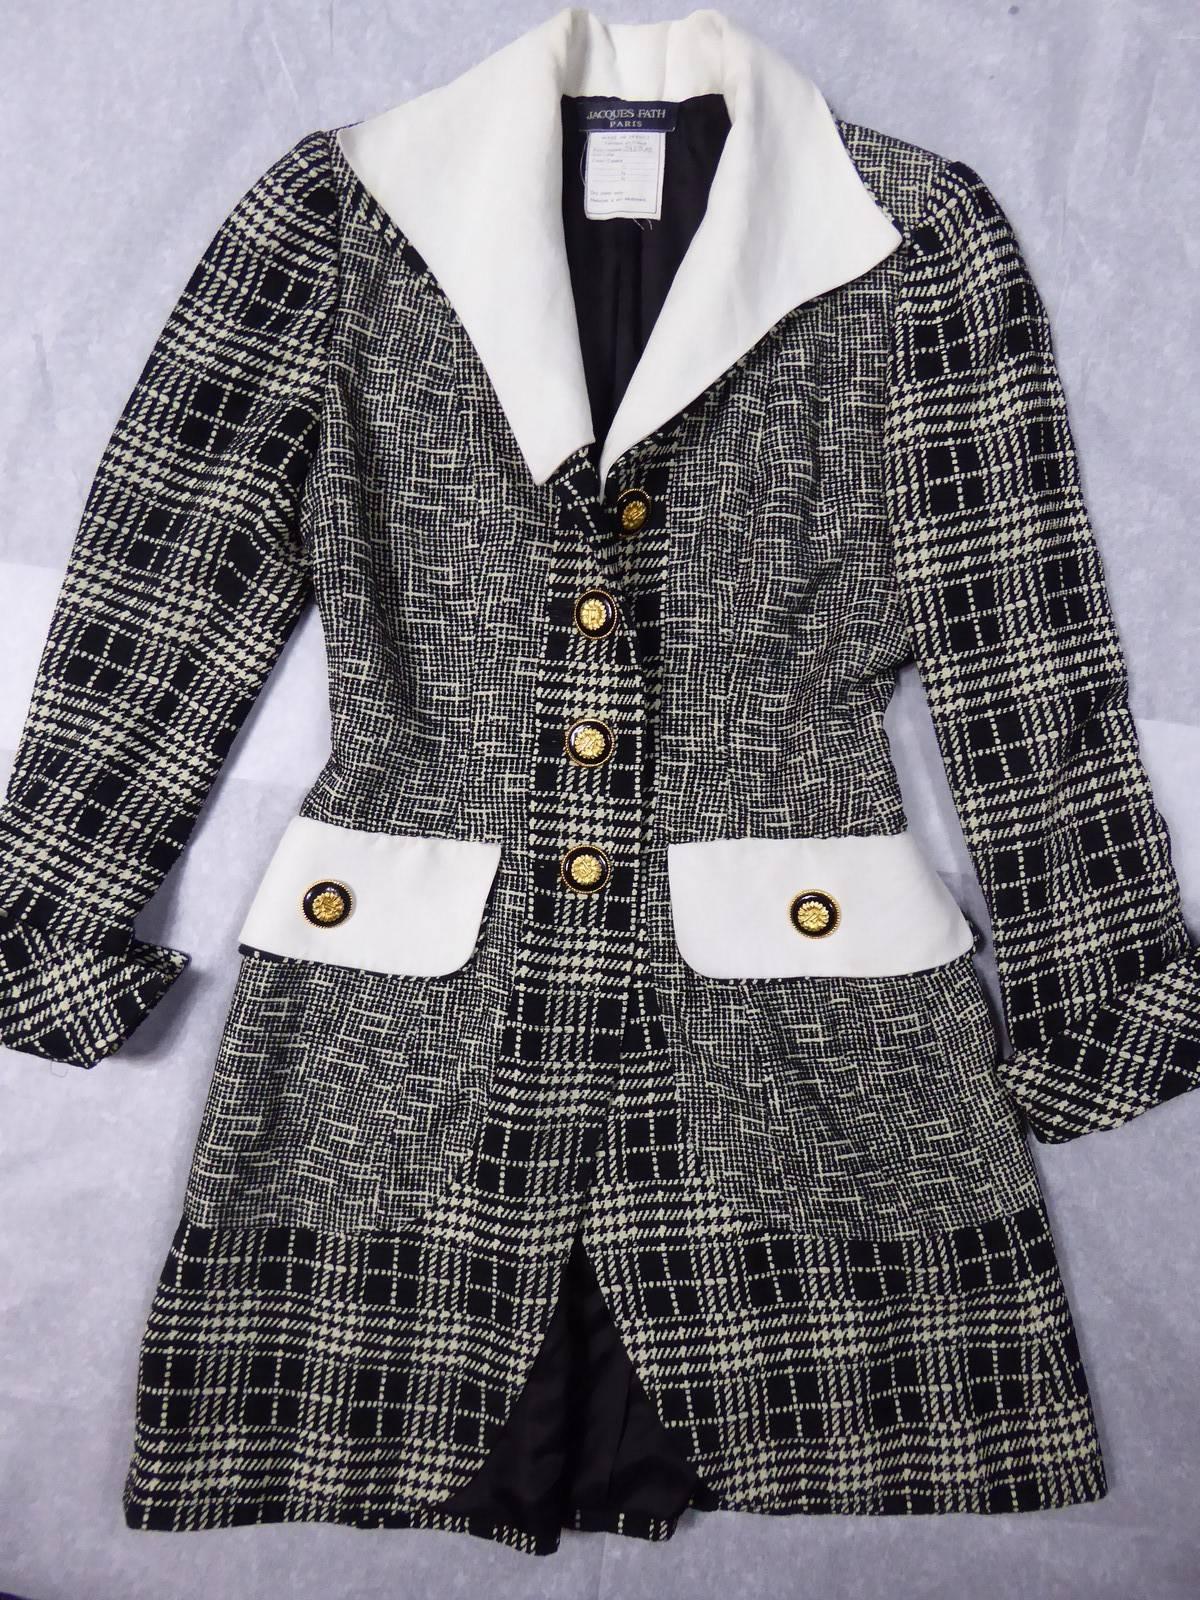 Circa 1990

France

Dress cocktail black and white of Jacques Fath and dating back to the 1990s. Track Jacquard black and white mottled effect and tiles. Dress coat of inspiration Board of Directors at buttoning front, pockets, collar and removable